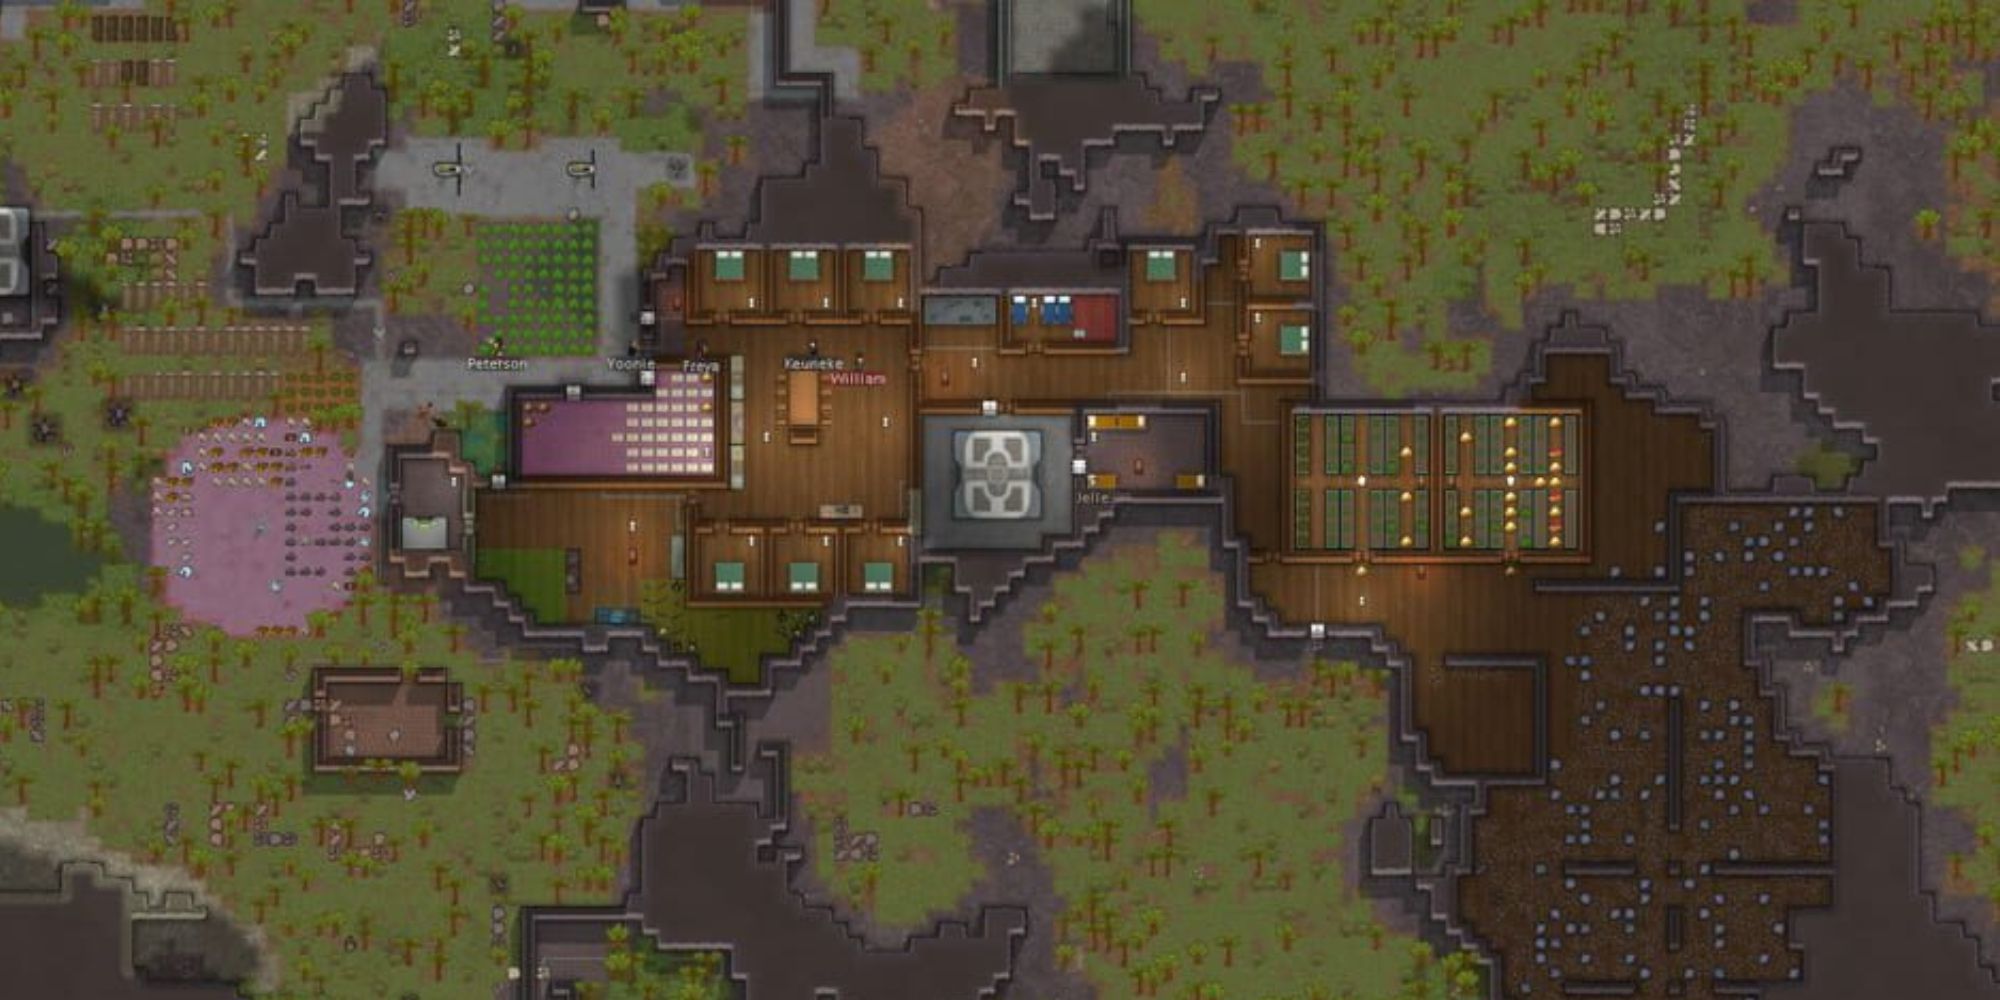 Colonists tend to their daily duties on a generated map